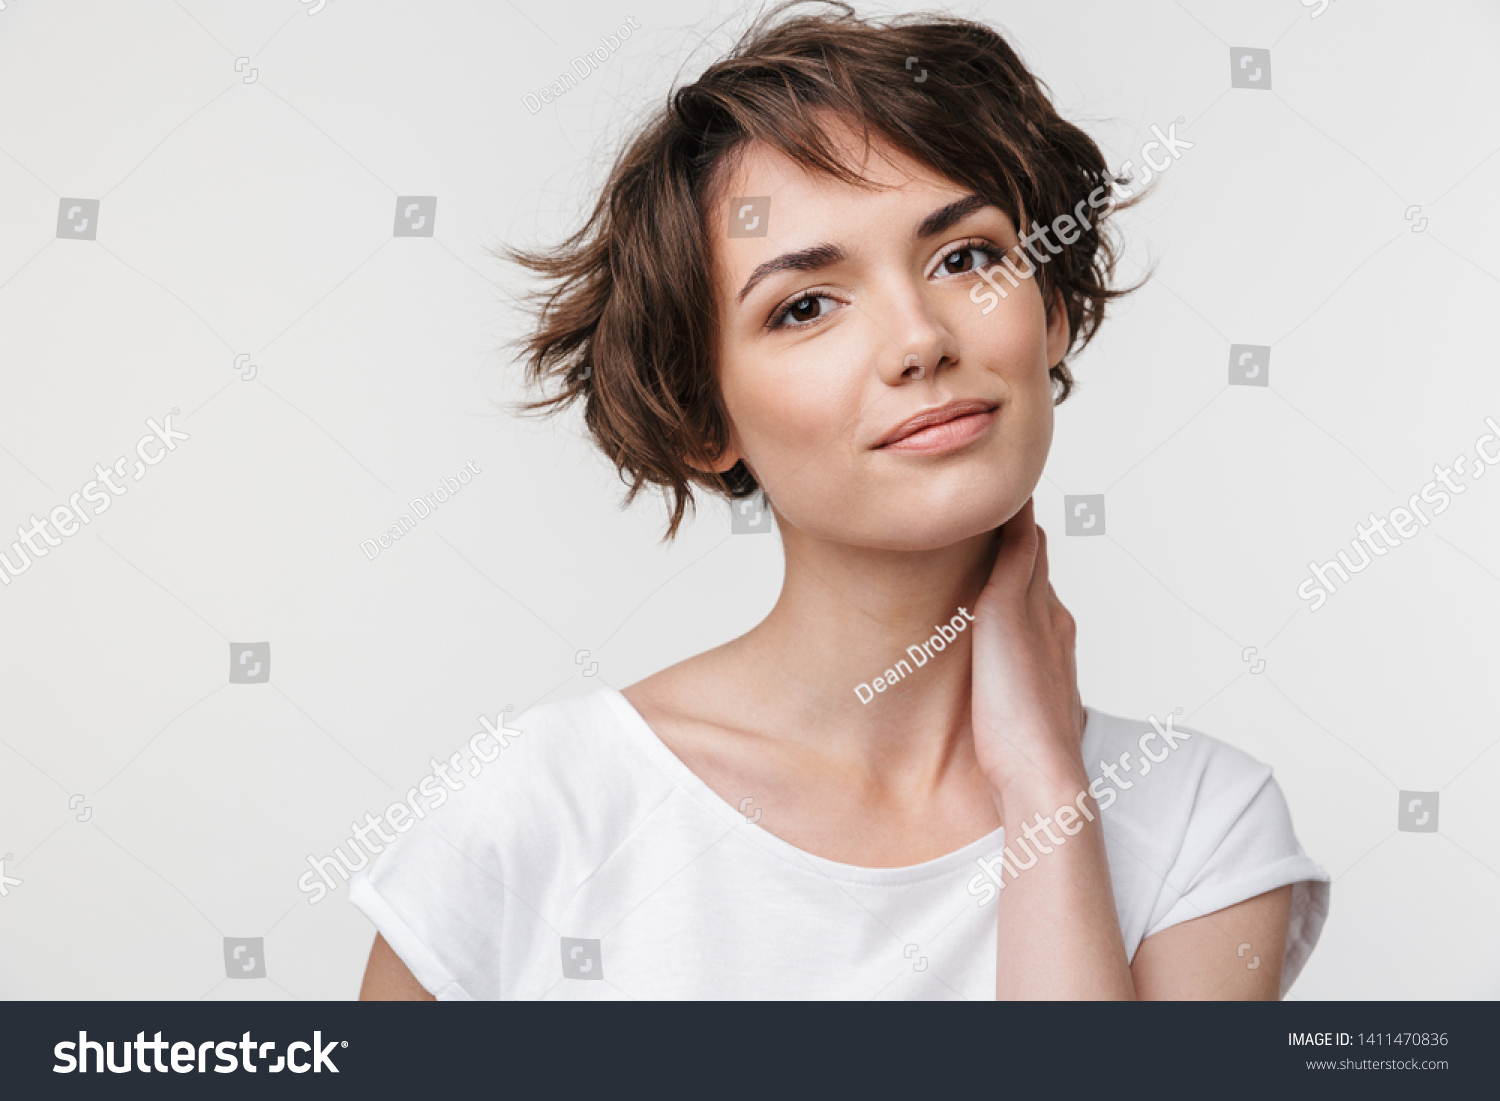 Portrait of pretty woman with short brown hair in basic t-shirt looking at camera while standing isolated over white background #1411470836